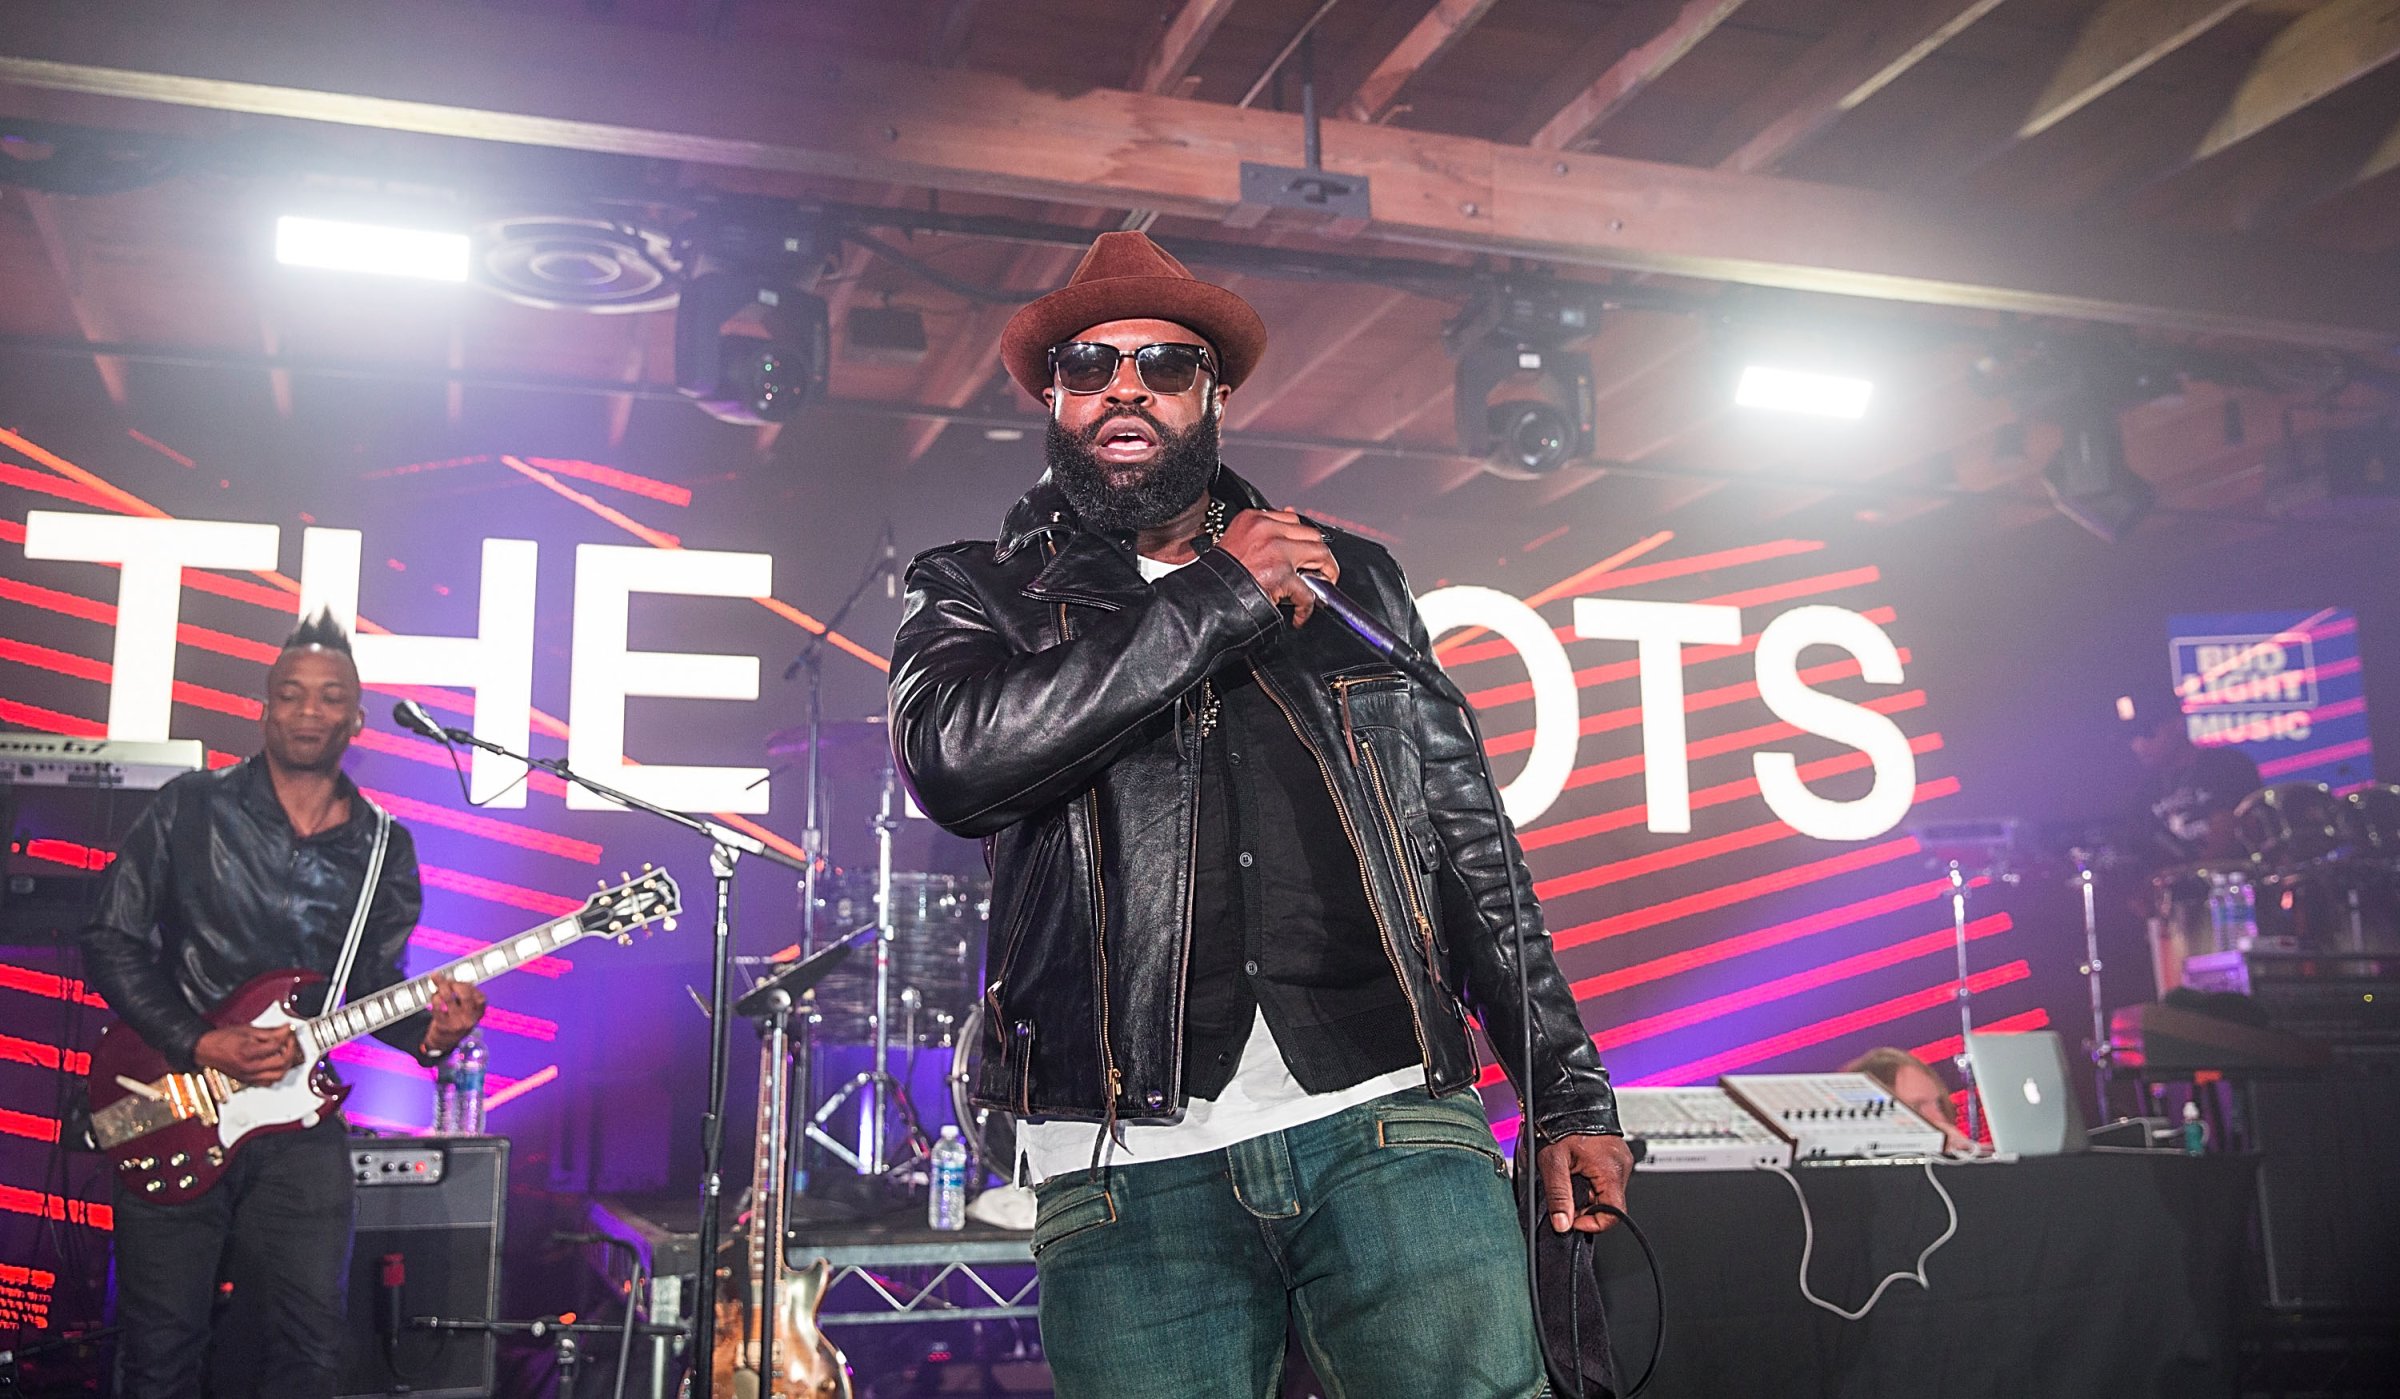 The Roots brought their legendary Jam Sessions to SXSW for the first time during an exclusive performance at the Bud Light Factory during the Bud Light Music Showcase on March 19, 2016 in Austin, Texas.